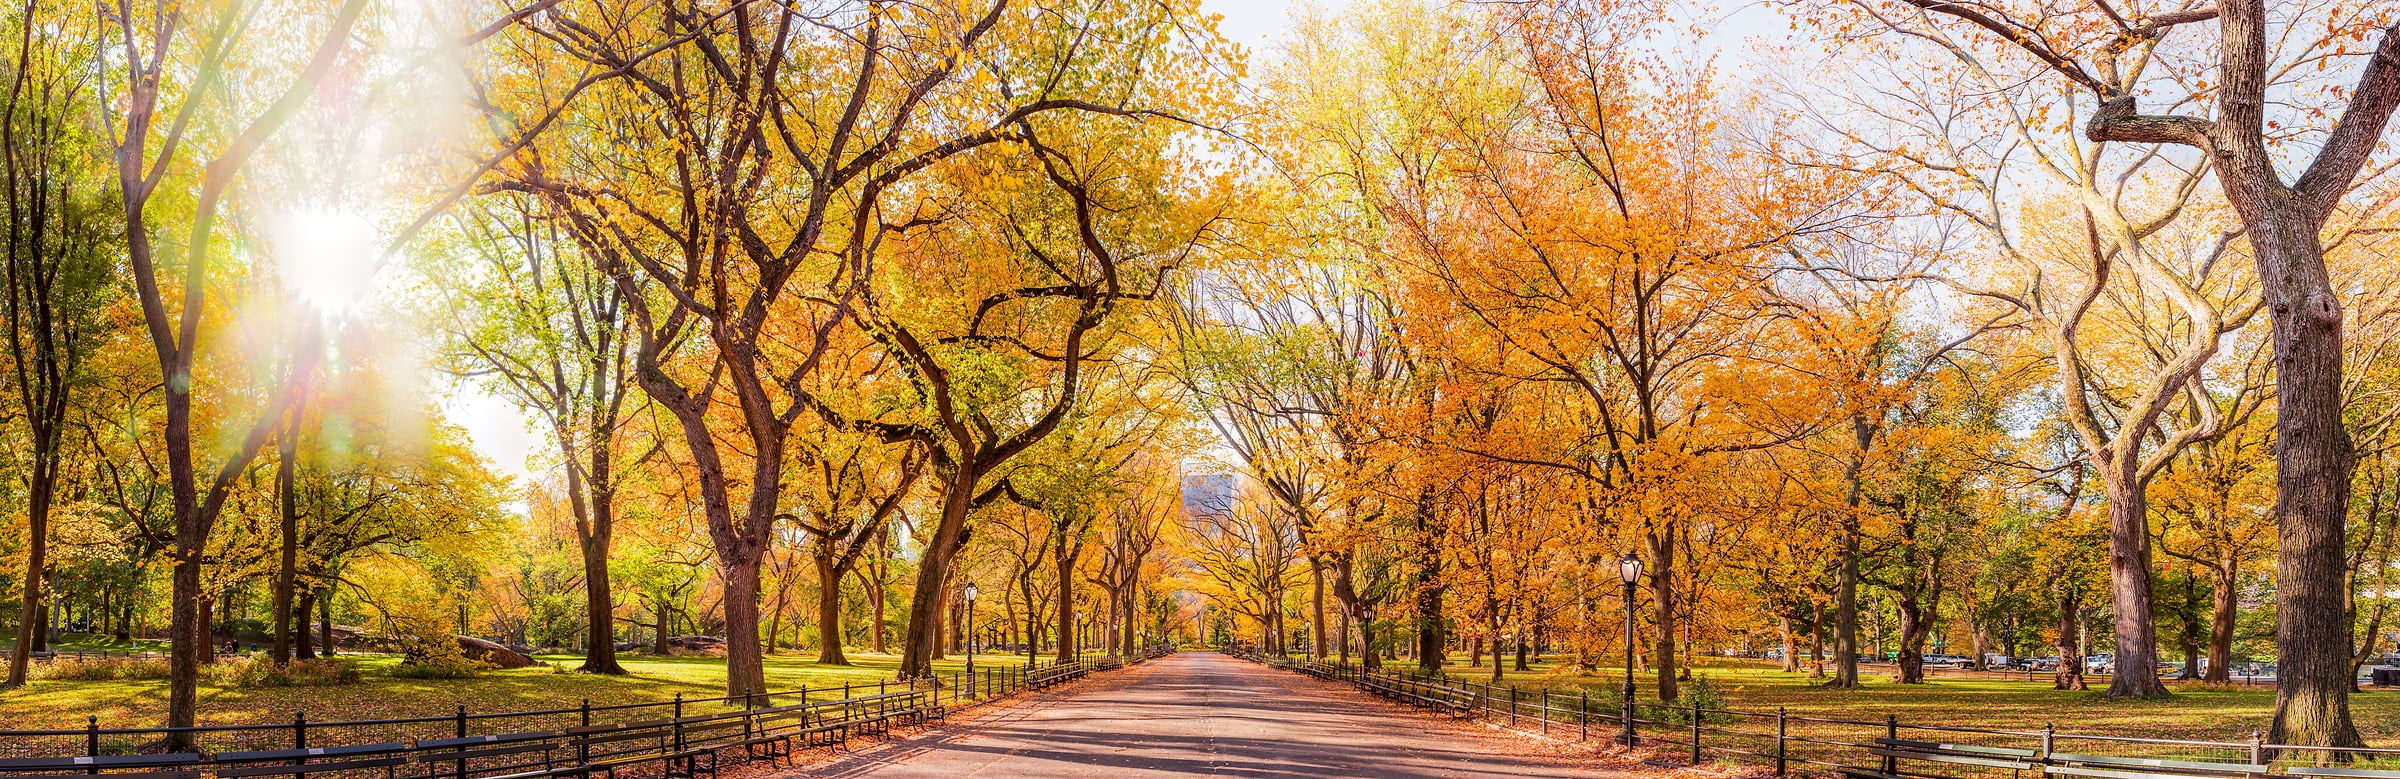 4,103 megapixels! A very high definition VAST photo of autumn trees on the Mall in Central Park in New York City at sunrise; created by Dan Piech.